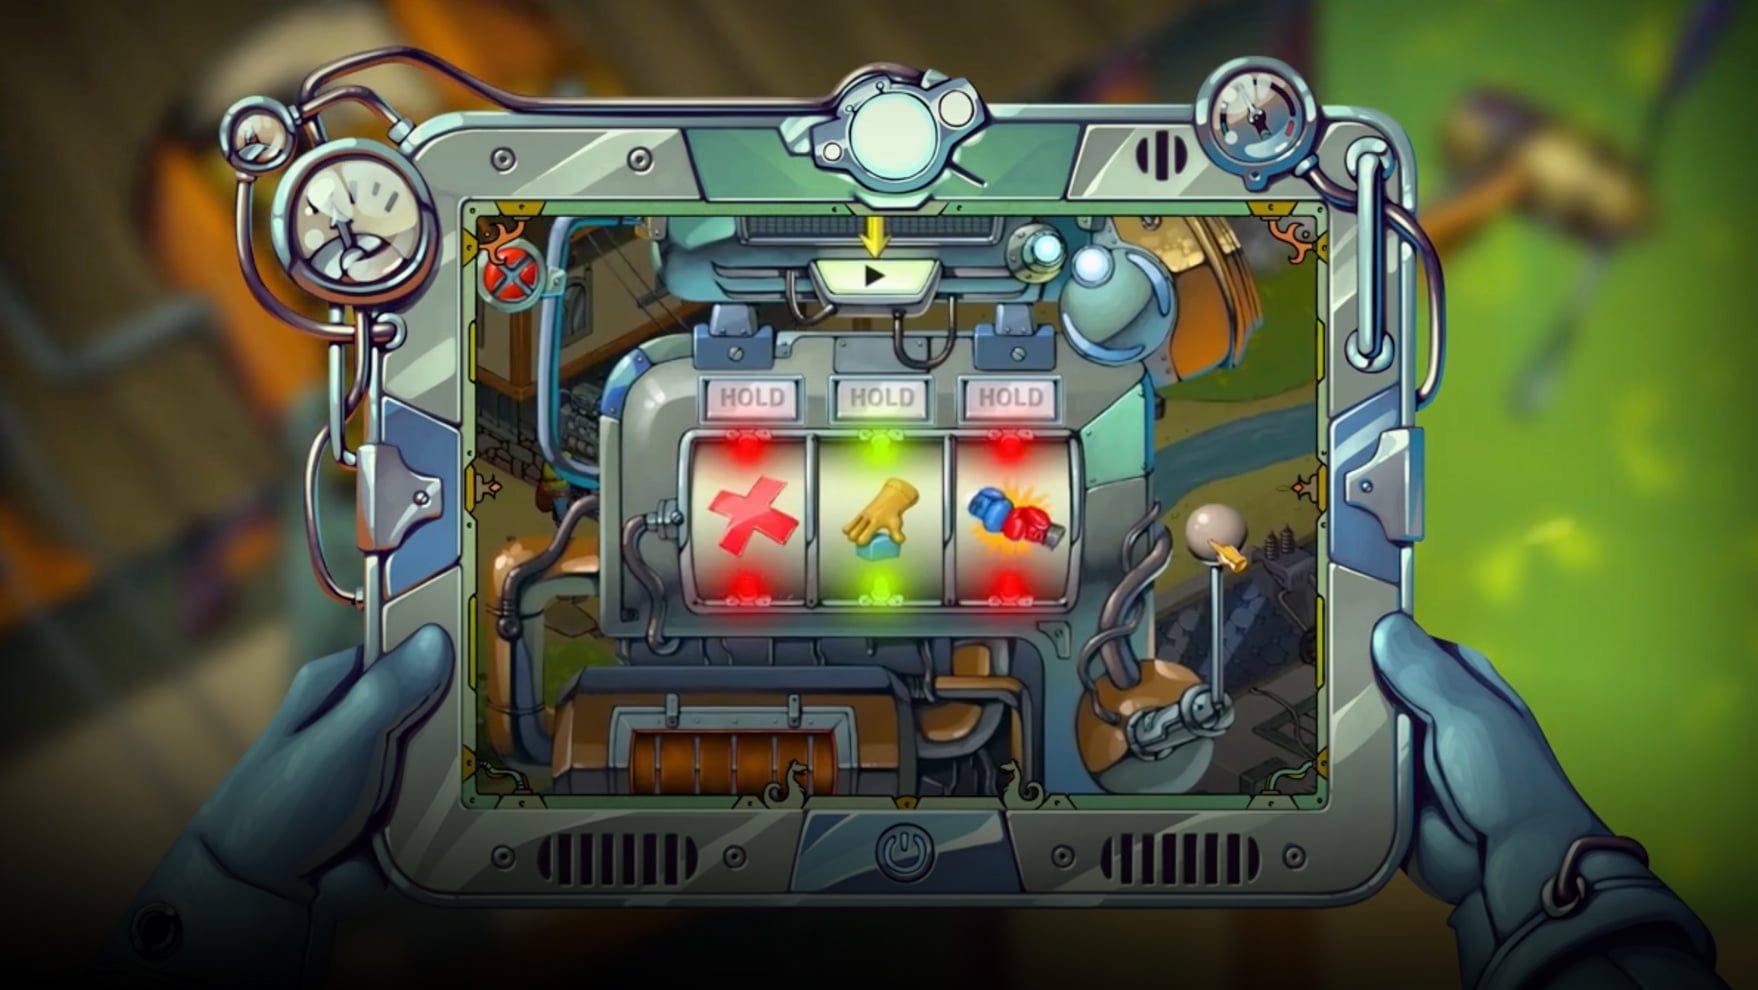 Each episode is followed by a mini-slot game